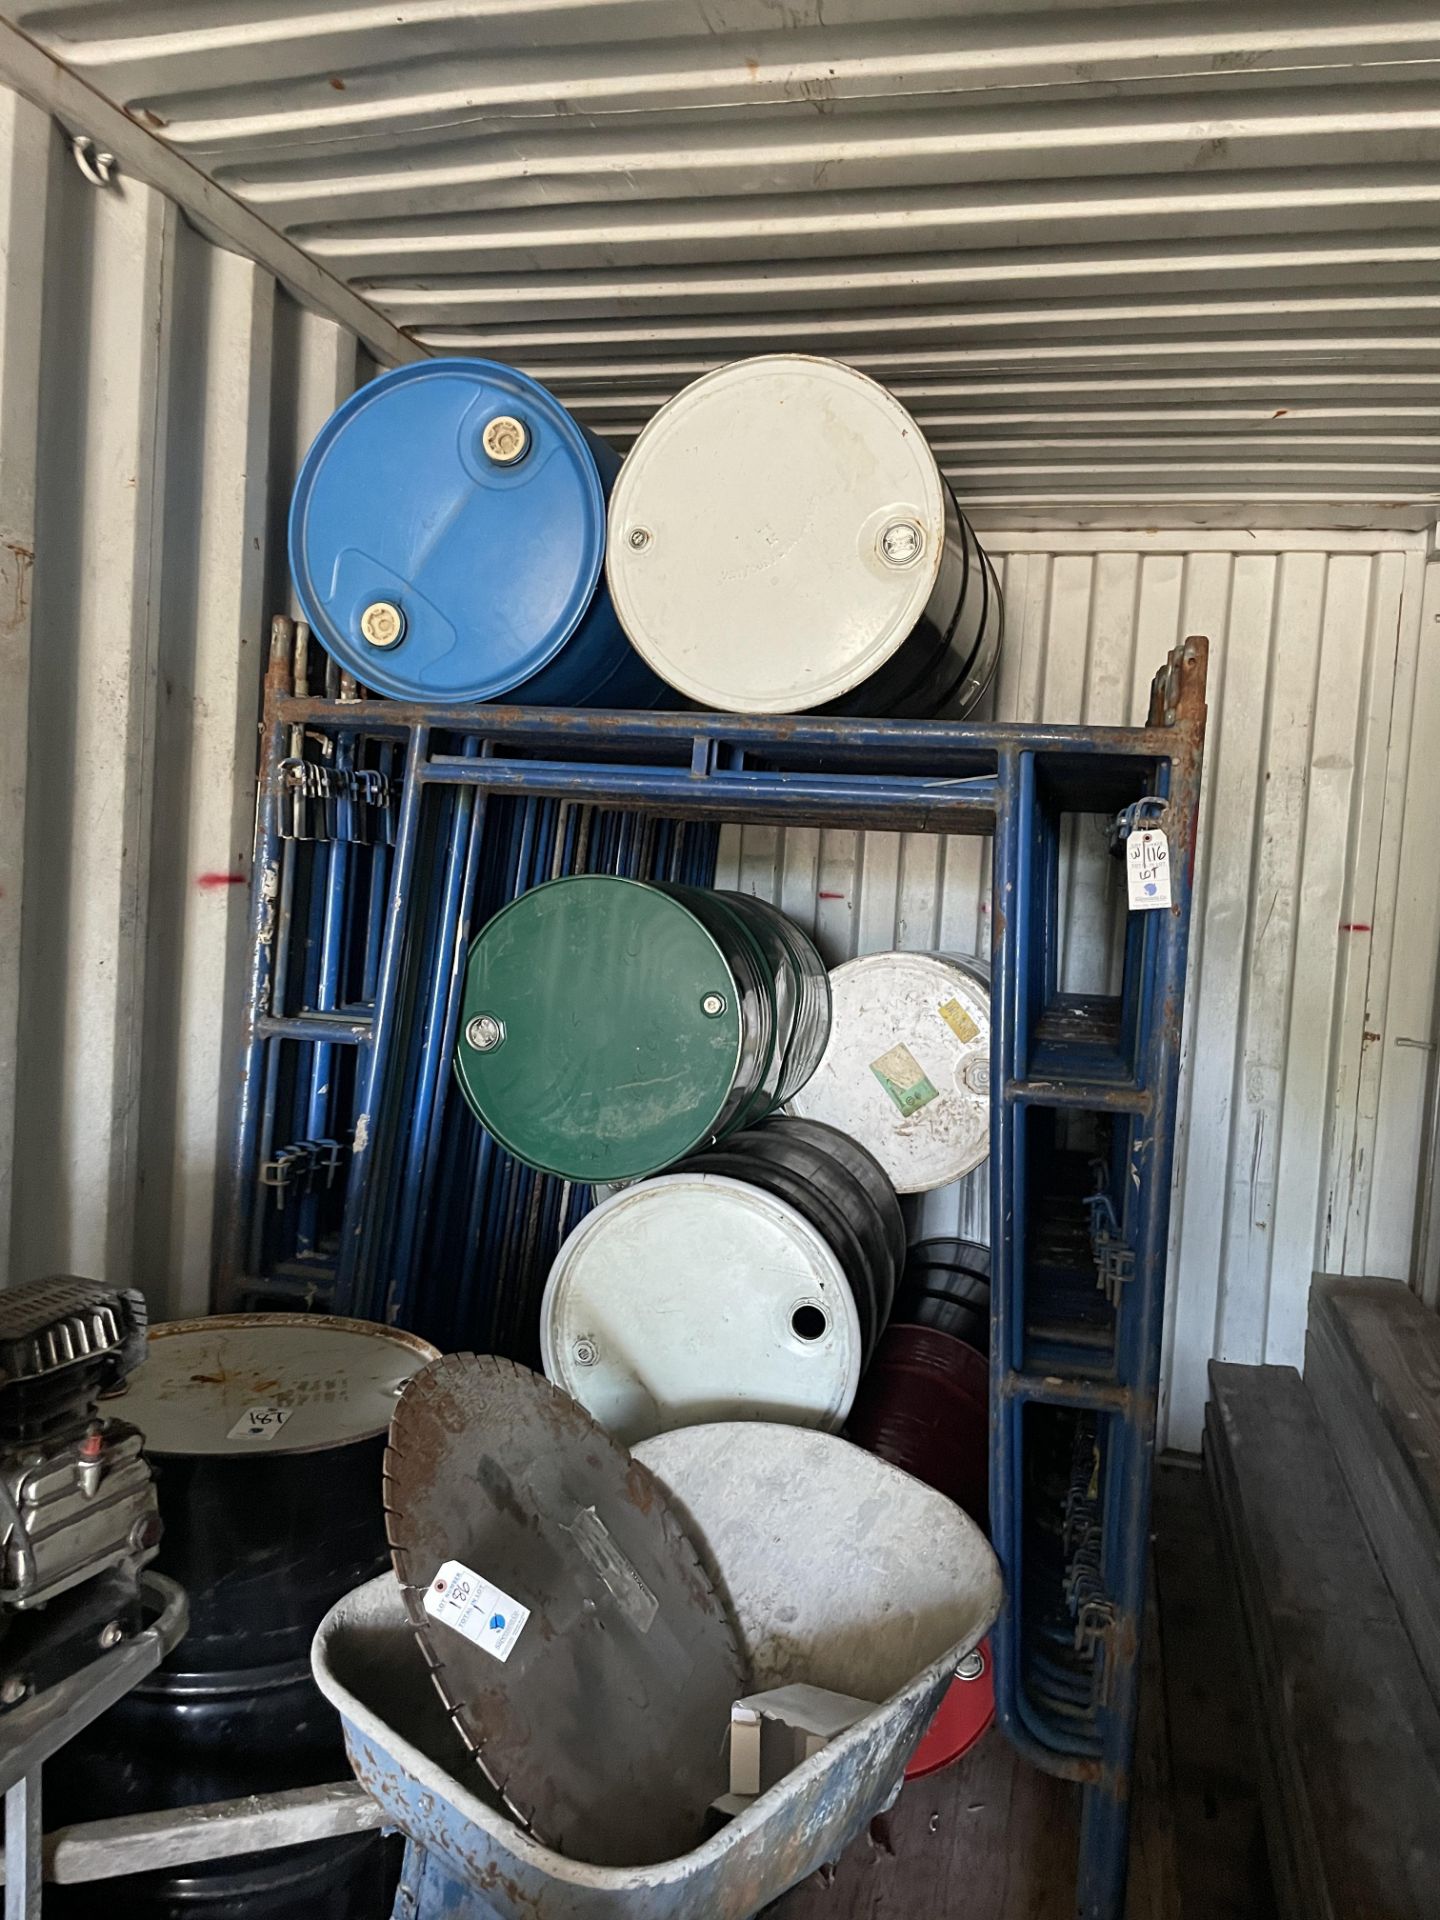 {LOT} Balance in Container C/O: Ladders, Fan, Metal, Motors, Plastic and Metal Drums in One Box - Image 3 of 5